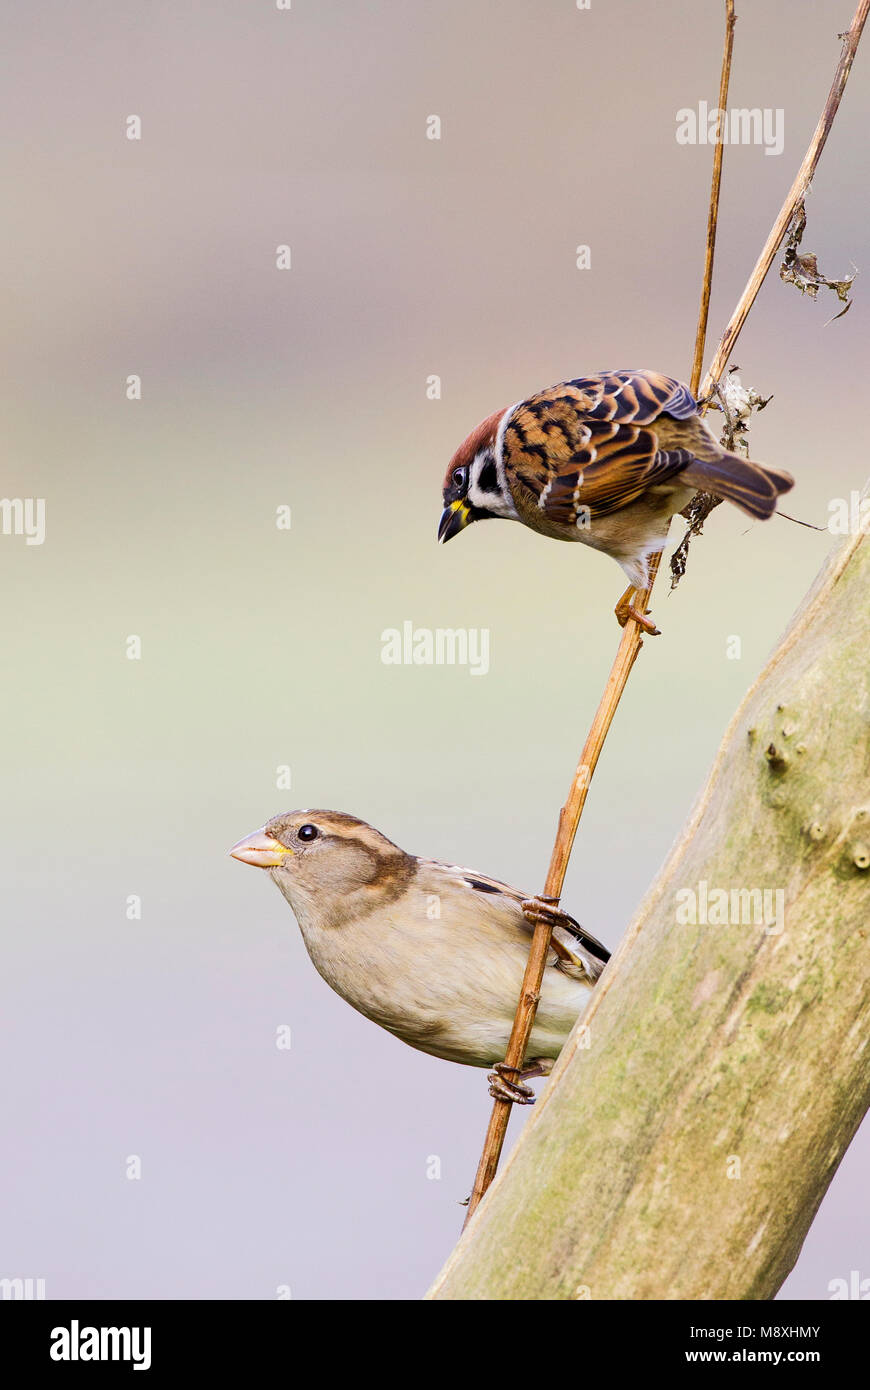 Ringmus en Huismus op takje; Eurasian Tree Sparrow and House Sparrow perched on a branch Stock Photo